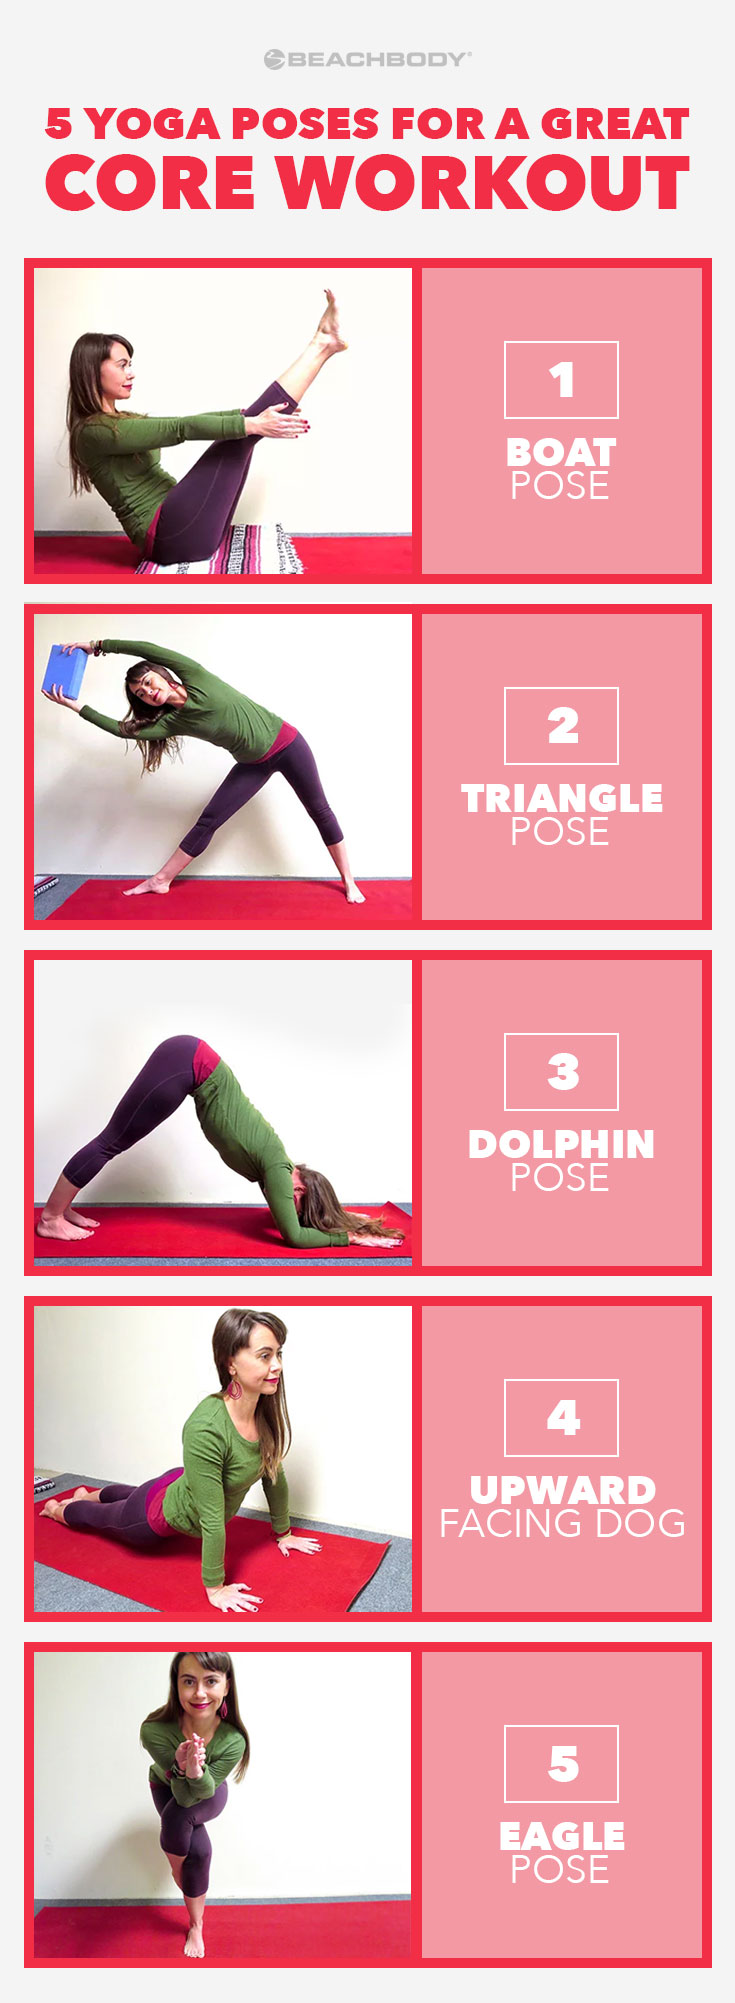 Core workouts sometimes only engage one, or some, of your abdominal muscles. The core is not just one muscle, it is a group of intertwining muscles in the torso that work together to support your spine and pelvis. Check out these 5 Yoga poses for a awesome core workout for overall core strength.